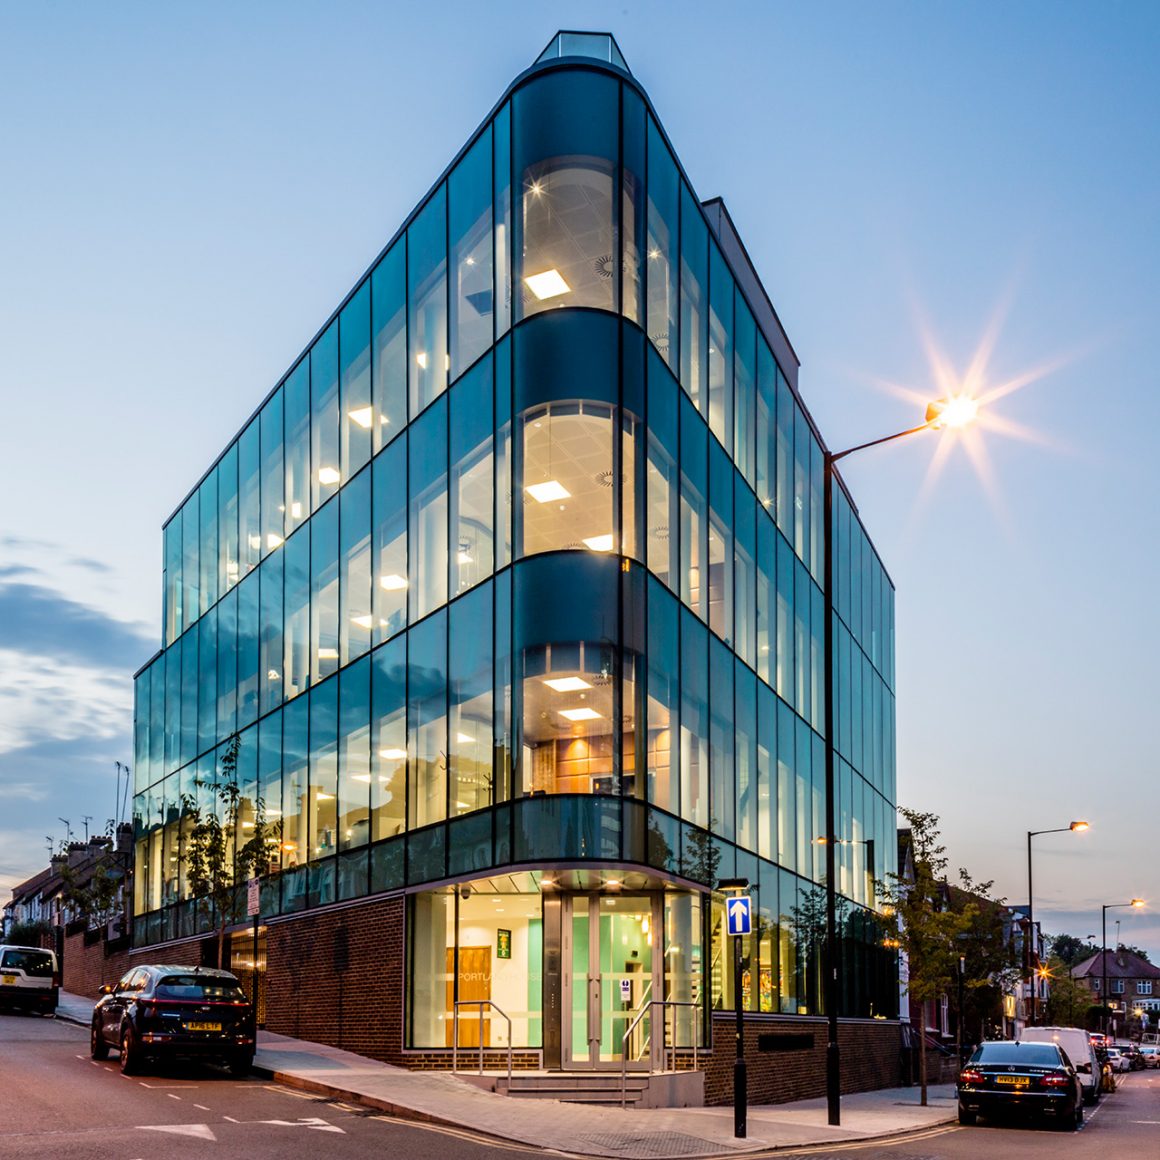 Commercial Office, North West London | Jon Kempner Photography | Architectural Photography